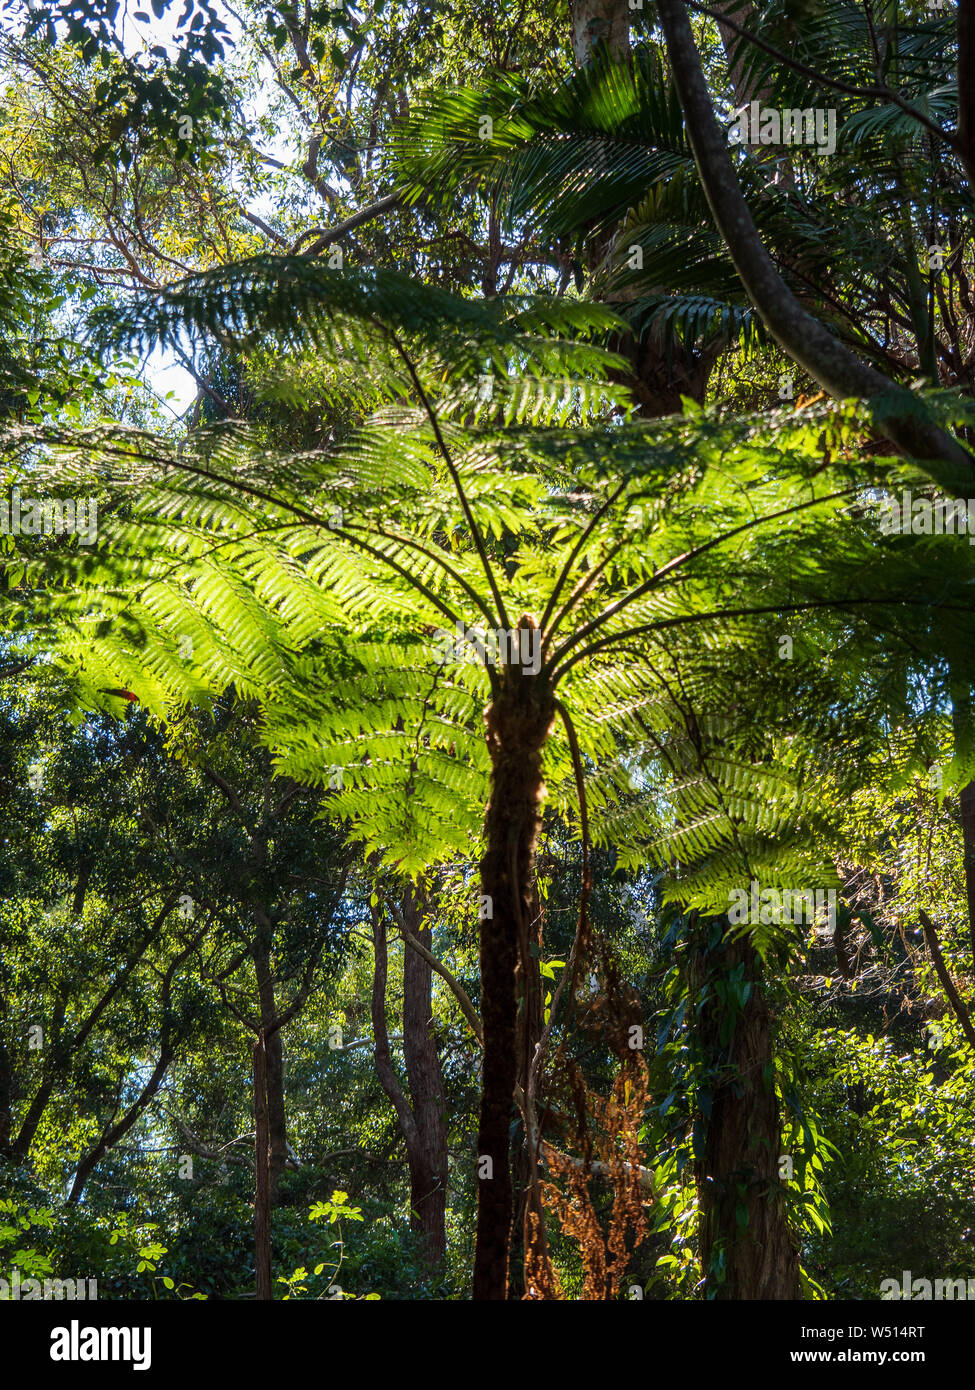 Tree fern in the rays of filtered sunlight Stock Photo